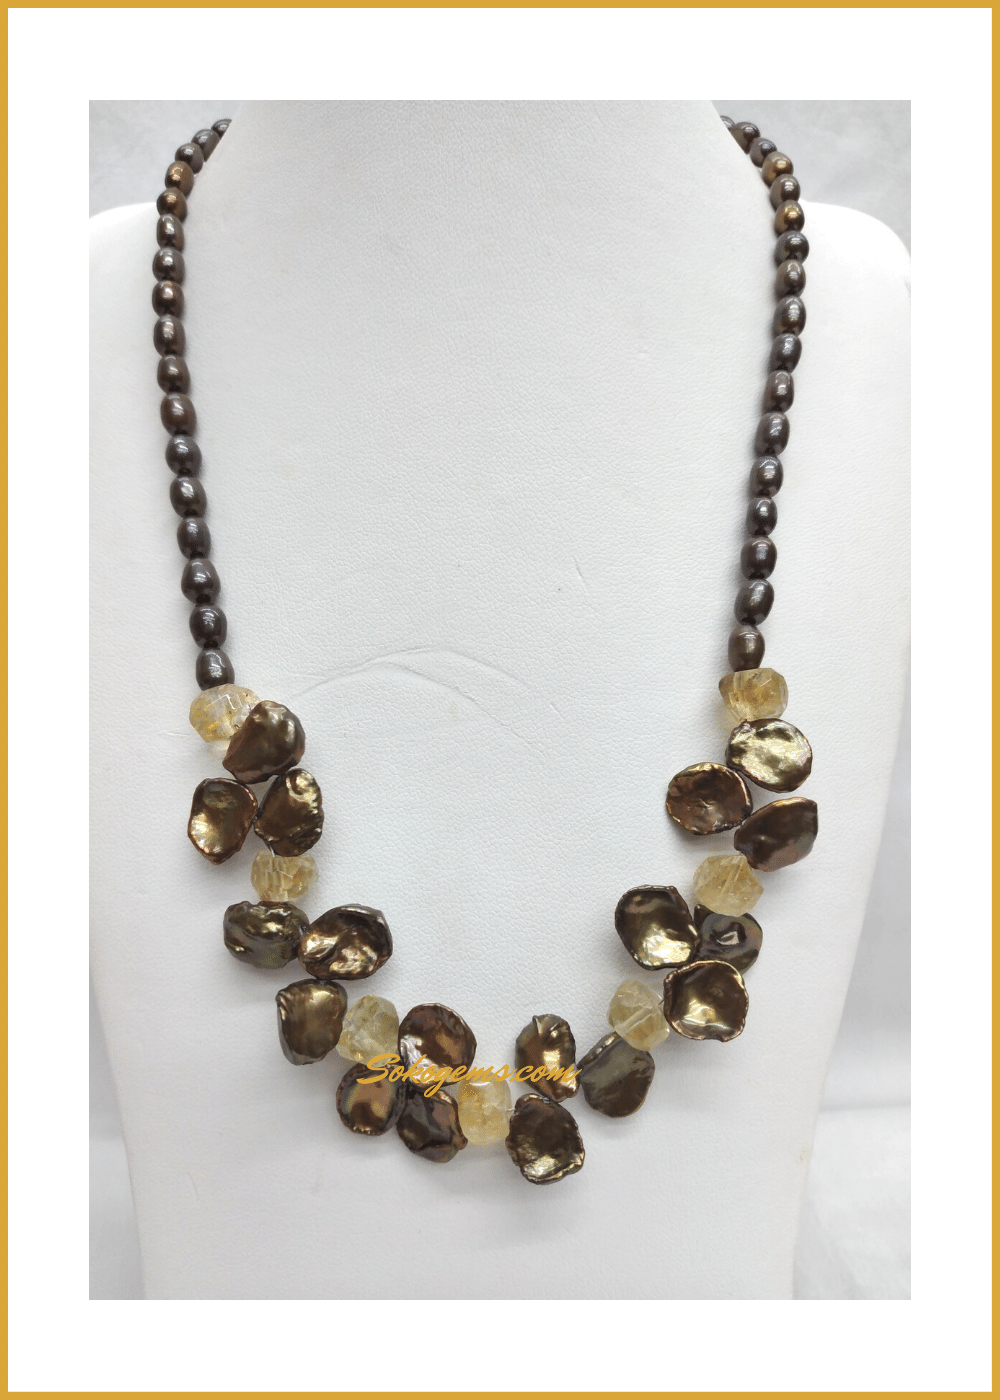 Buy Keshi Pearls and Citrine Necklace - Sokogems